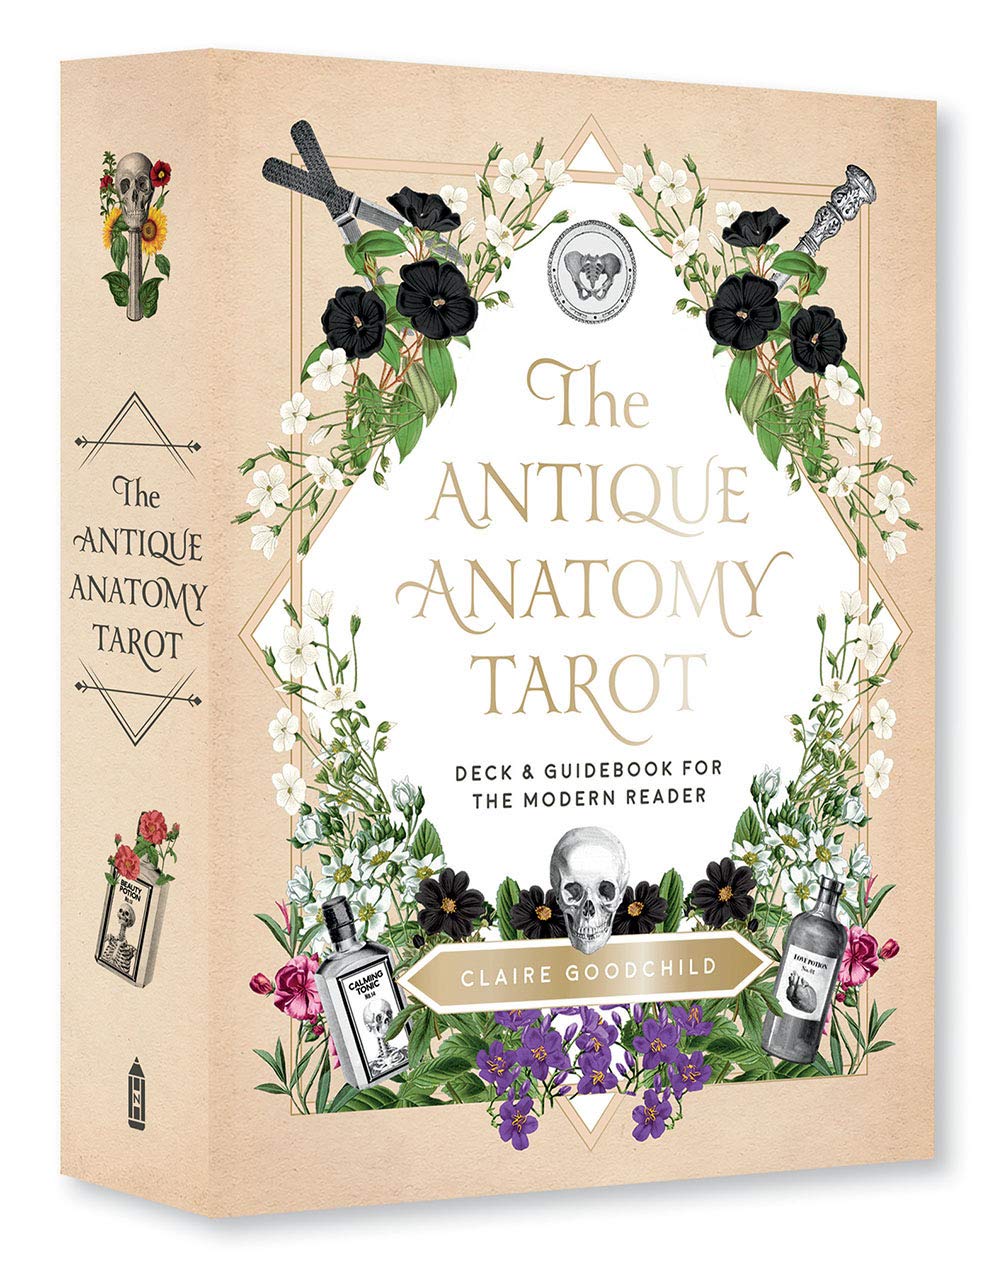 The Antique Anatomy Tarot Kit: Deck and Guidebook for the Modern Reader [Claire Goodchild]